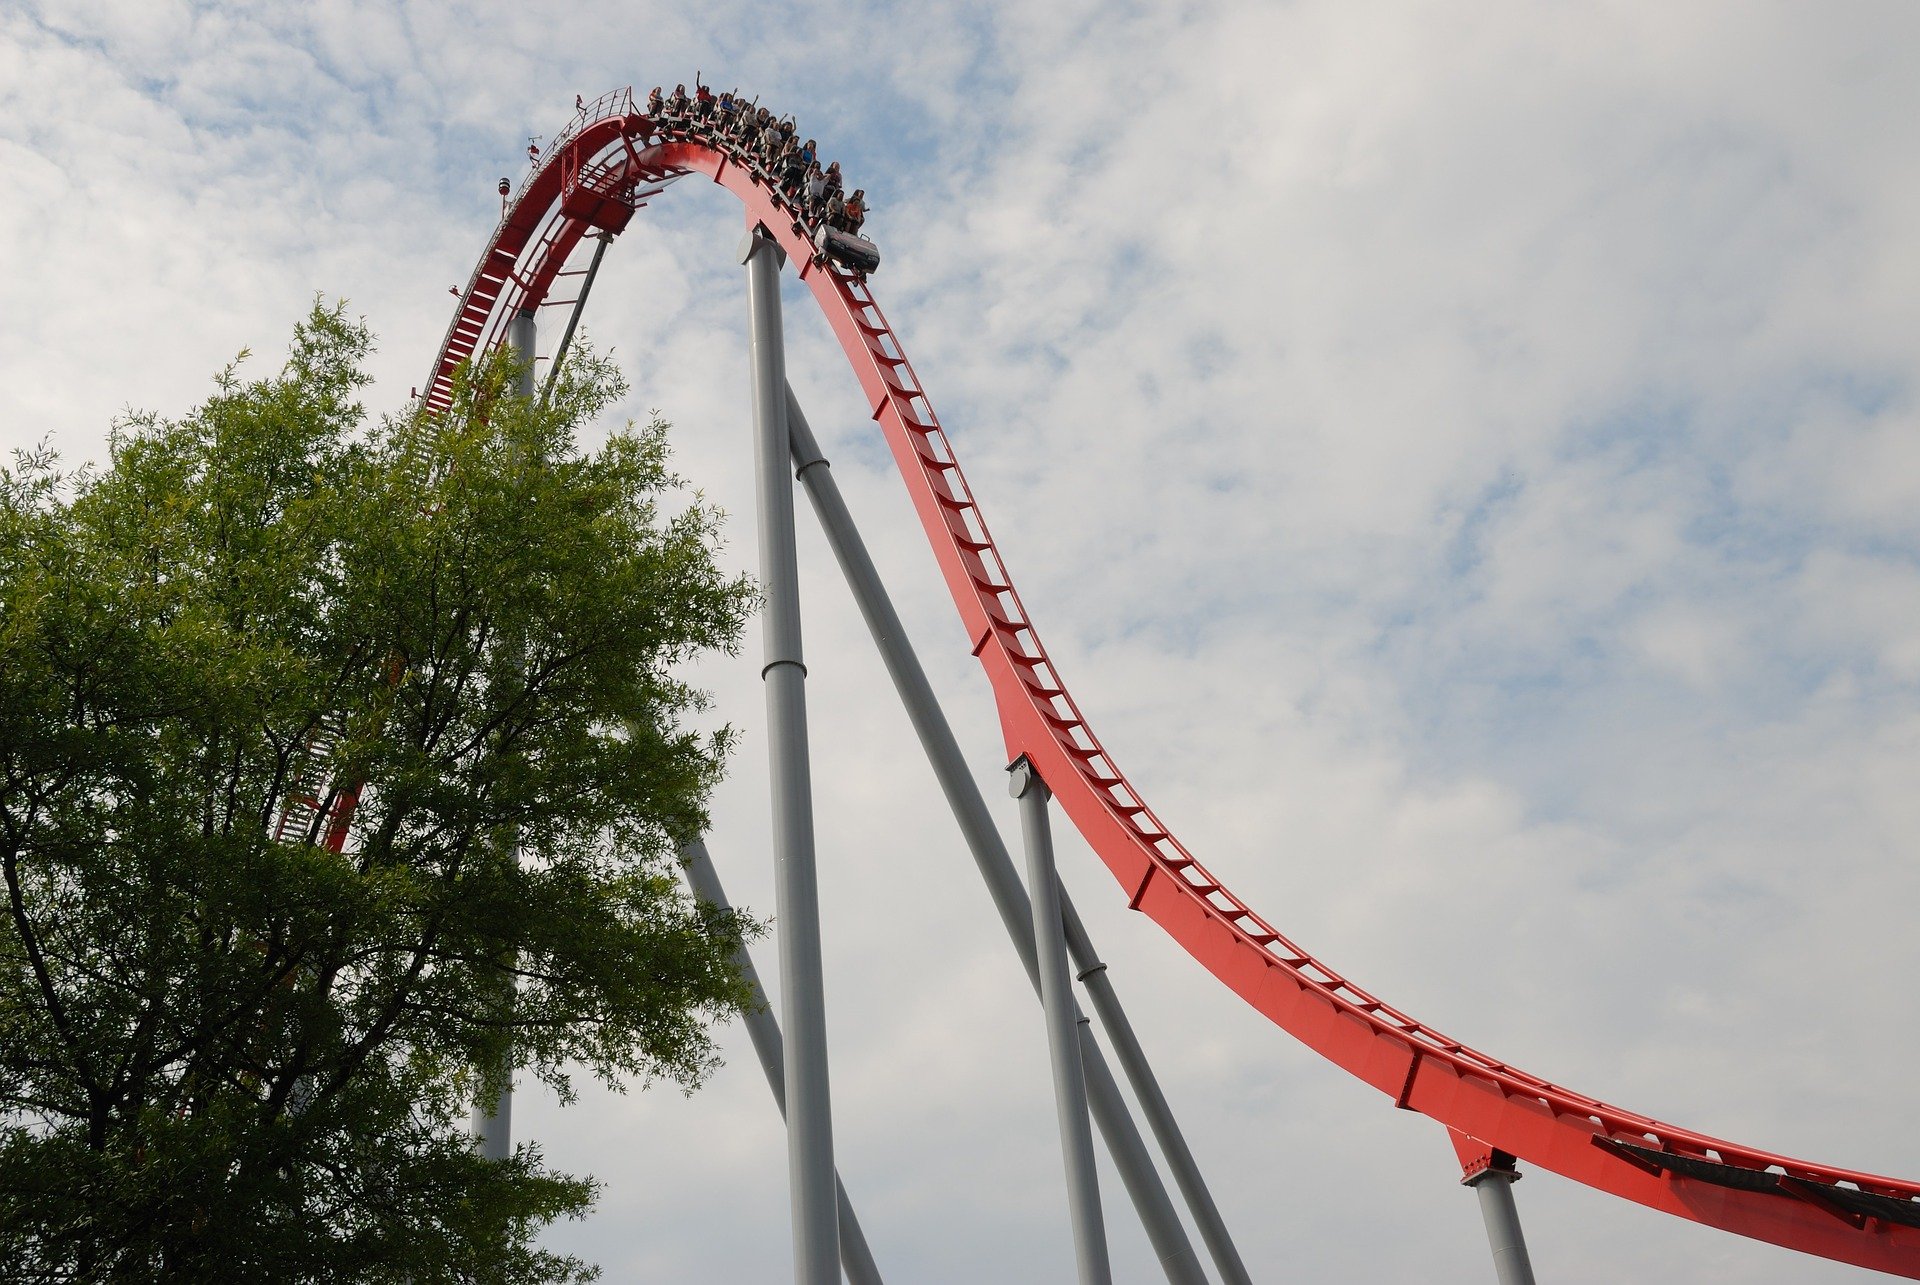 Image of a rollercoaster at the top of a big downward slope about to roll down it